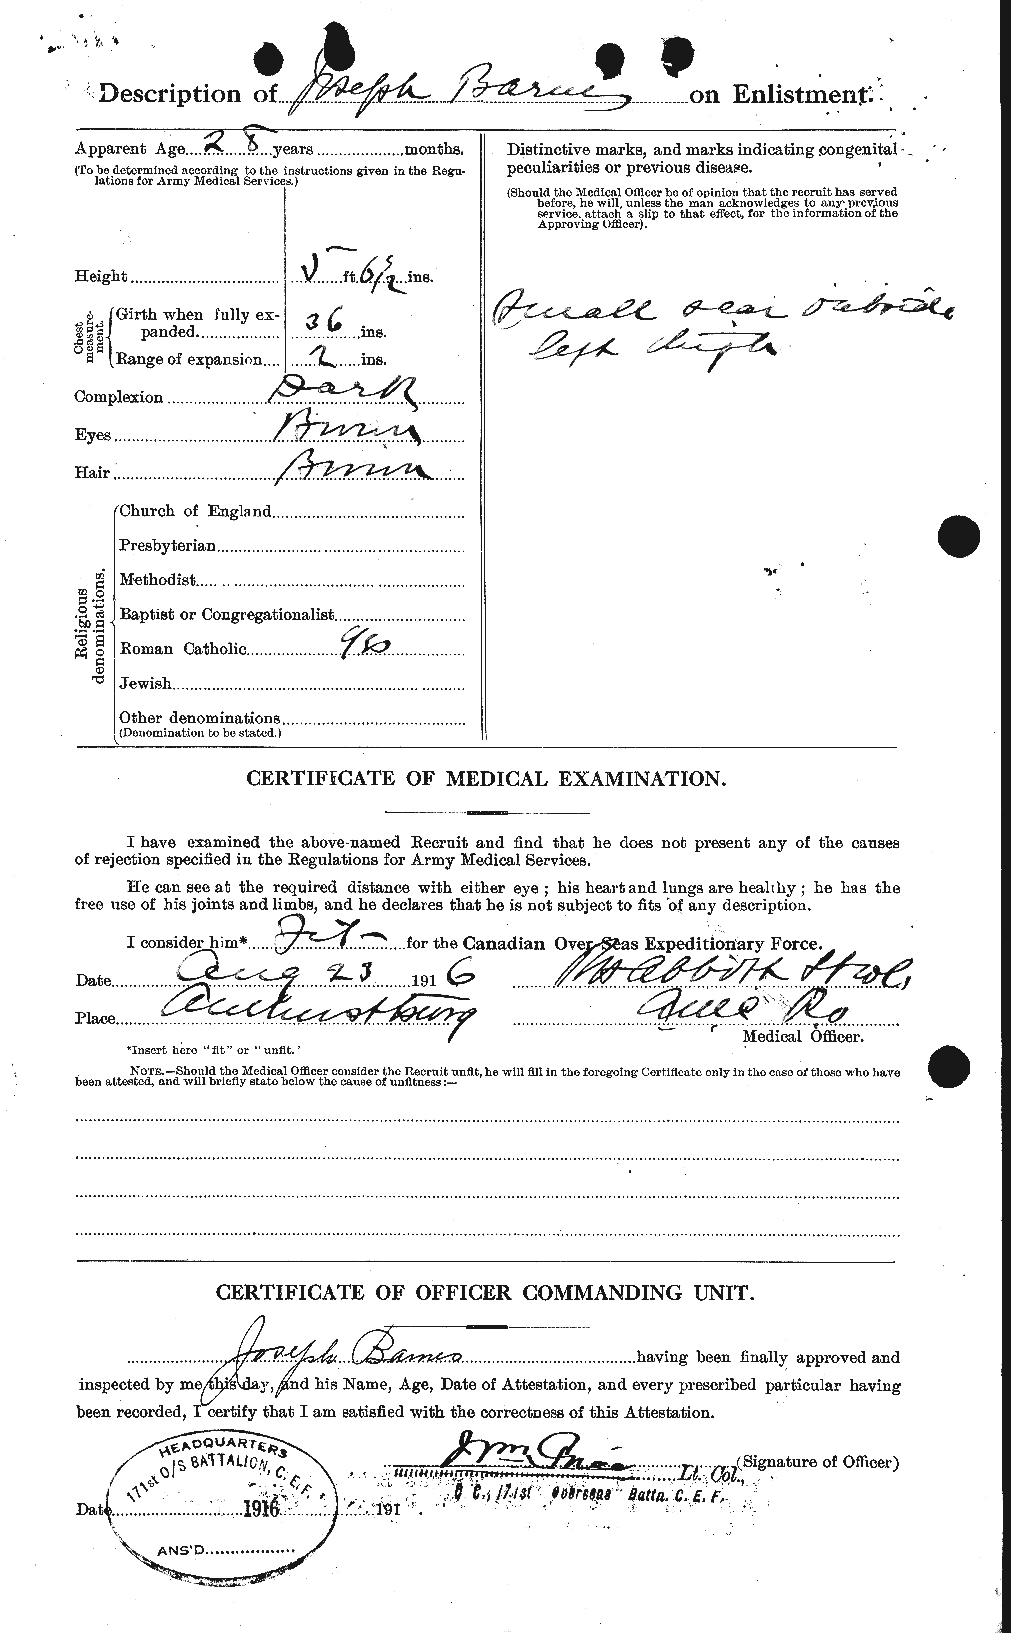 Personnel Records of the First World War - CEF 227428b